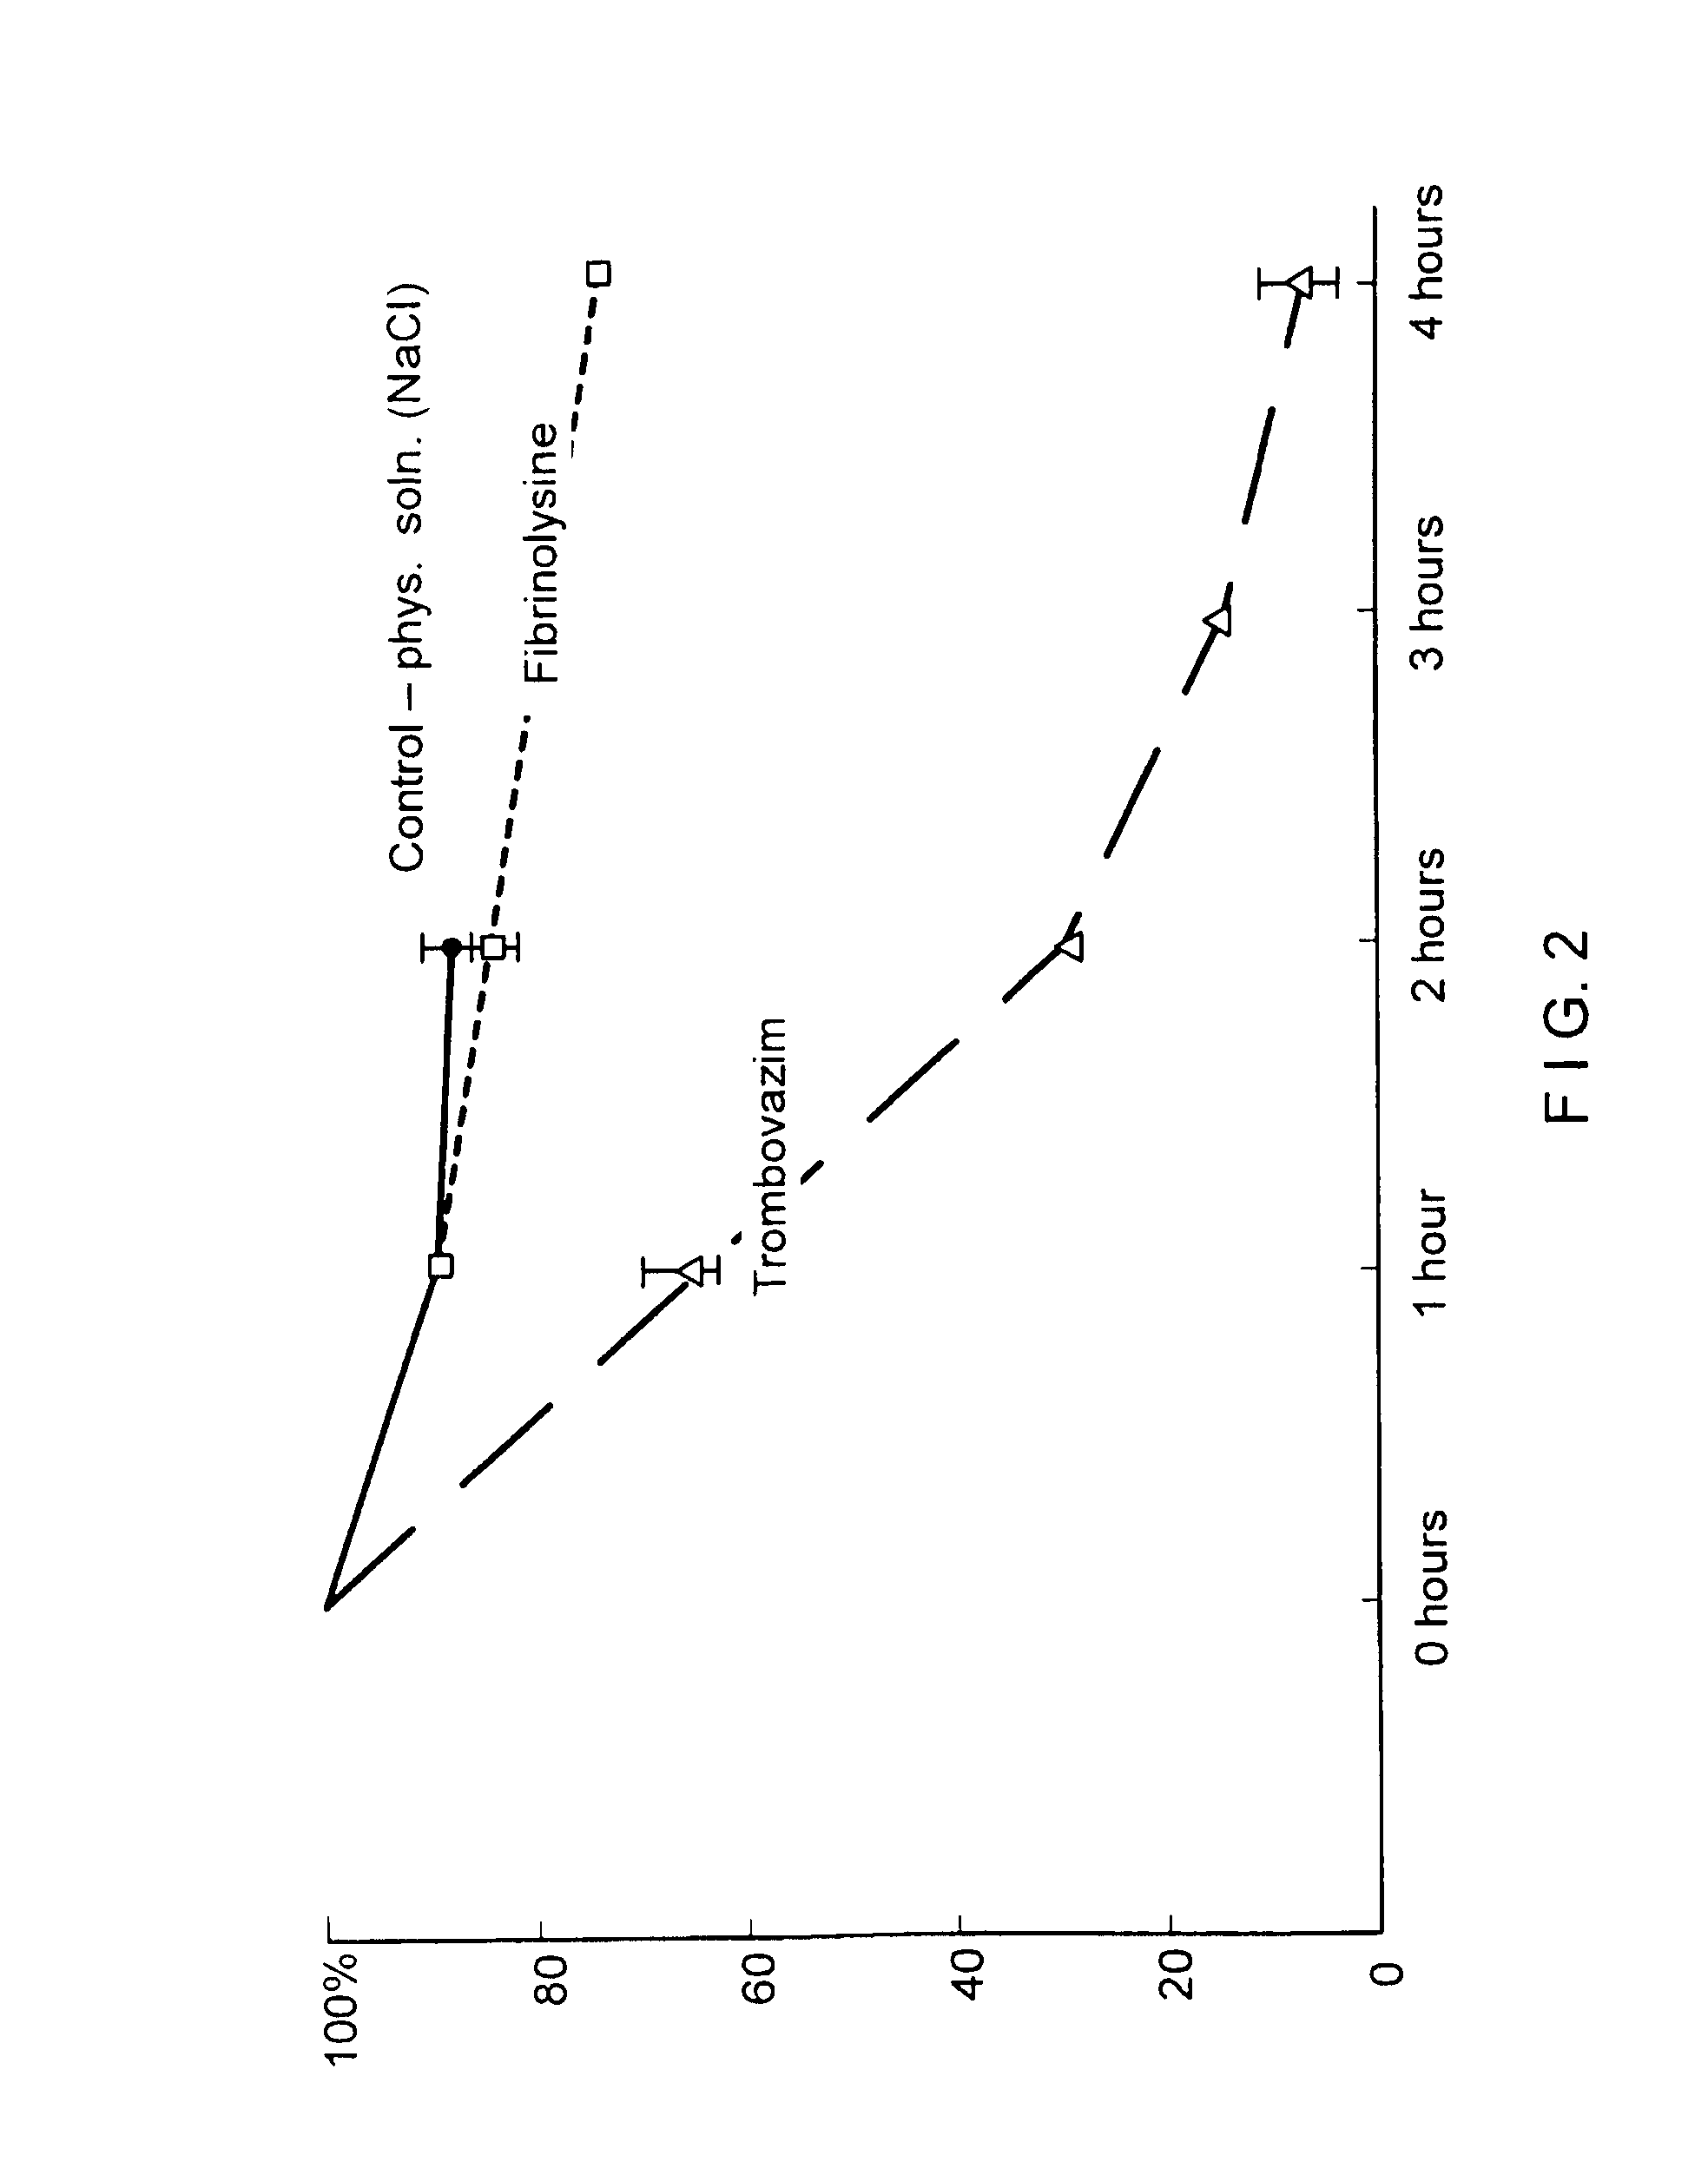 Therapeutic composition containing a plurality of immobilized proteases